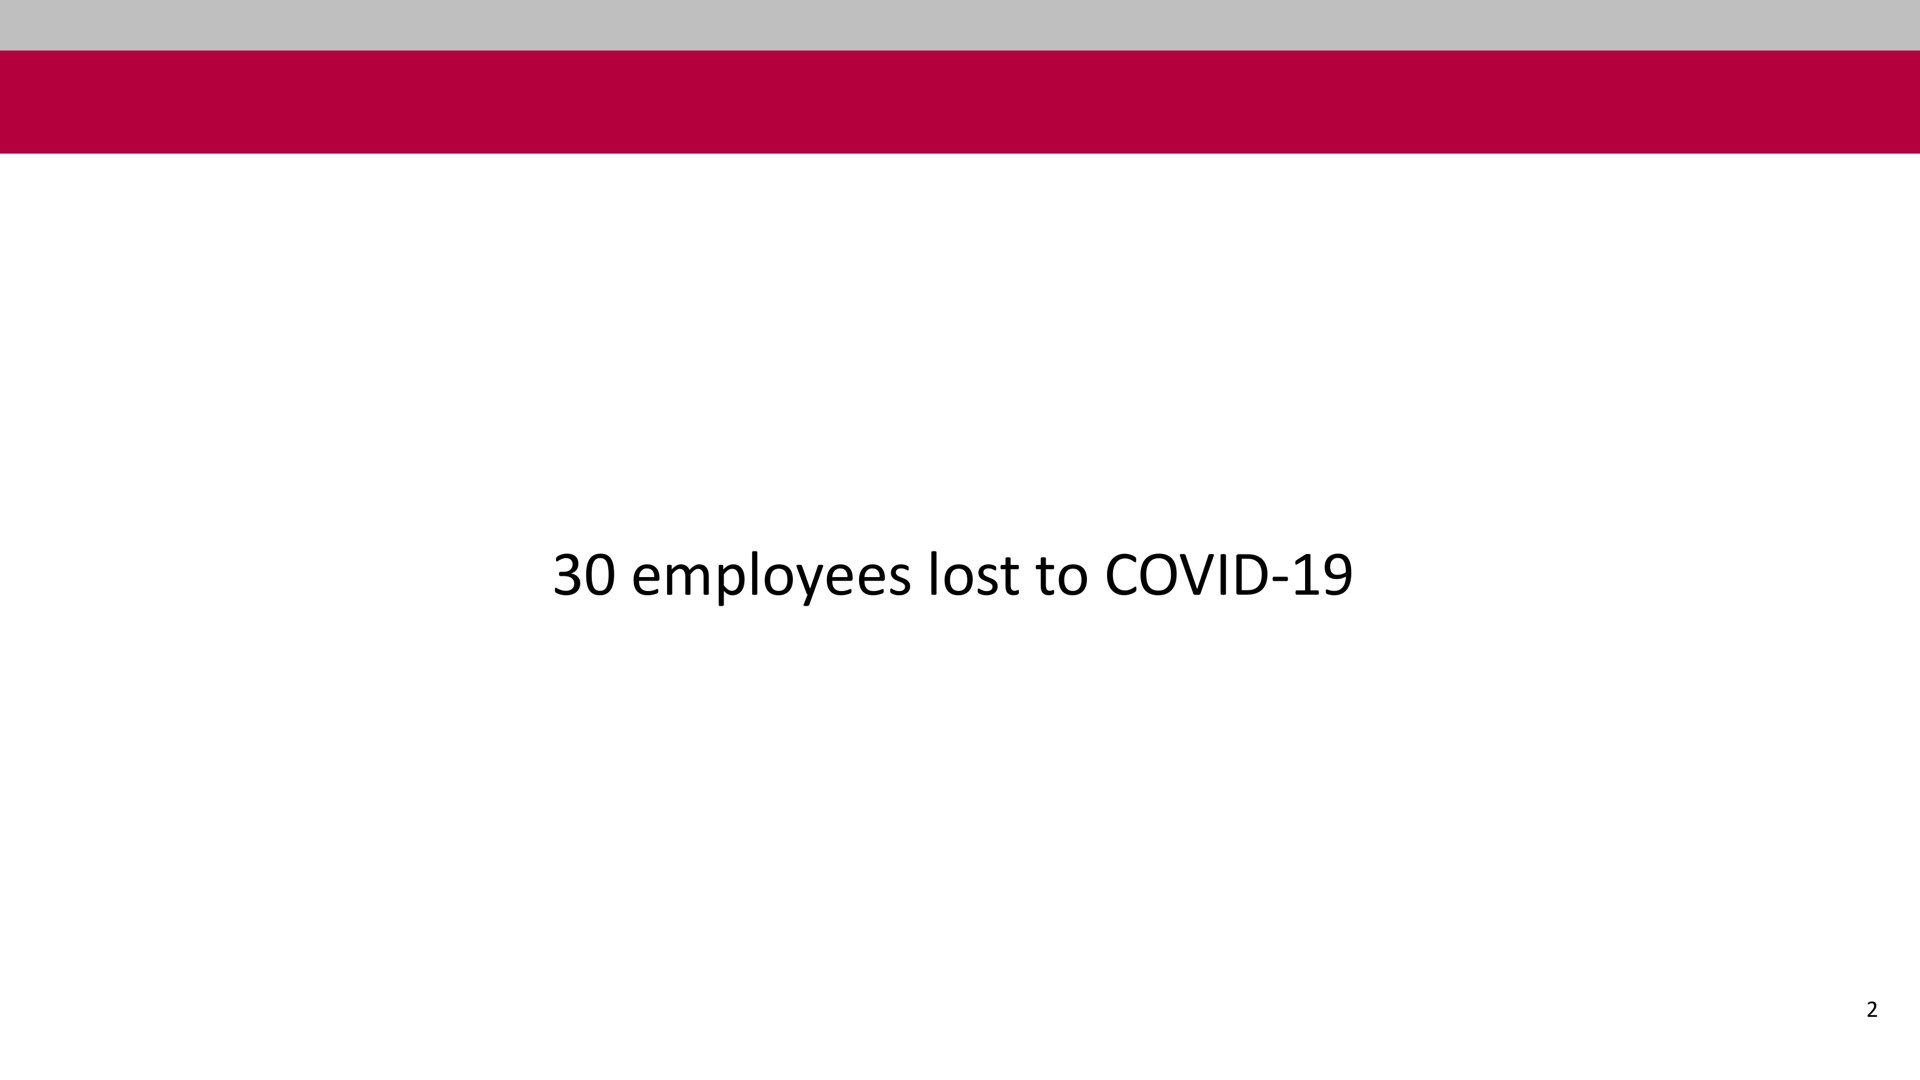 employees lost to covid | Associated British Foods